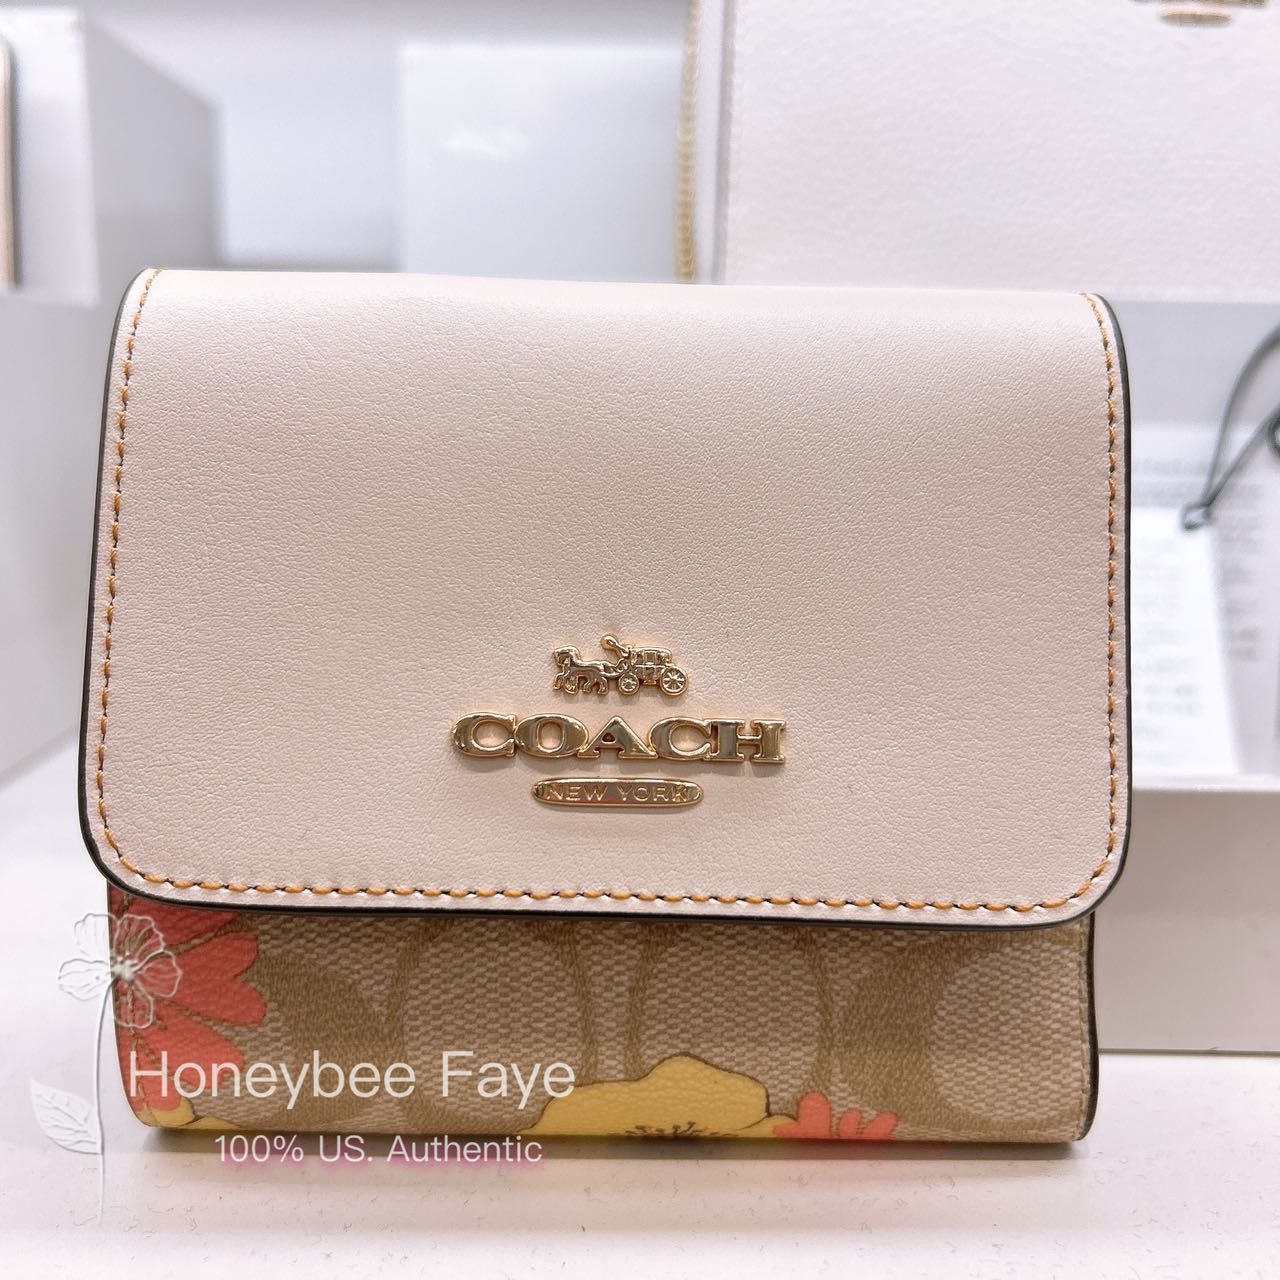 Coach CH719 Small Trifold Wallet In Signature Canvas With Floral